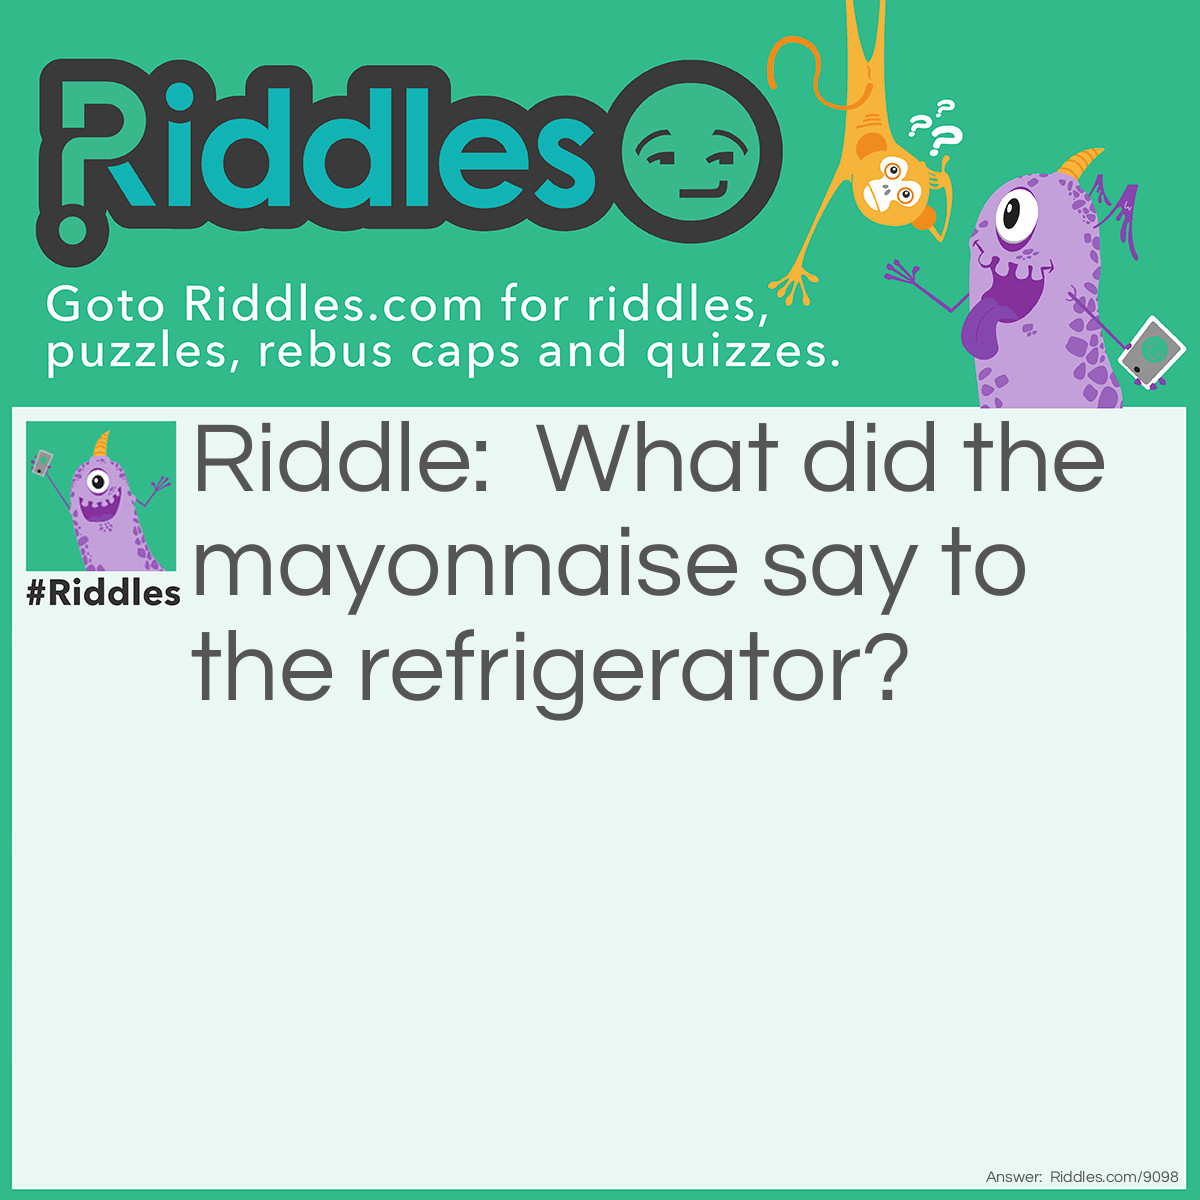 Riddle: What did the mayonnaise say to the refrigerator? Answer: "Please close the door, I'm dressing".